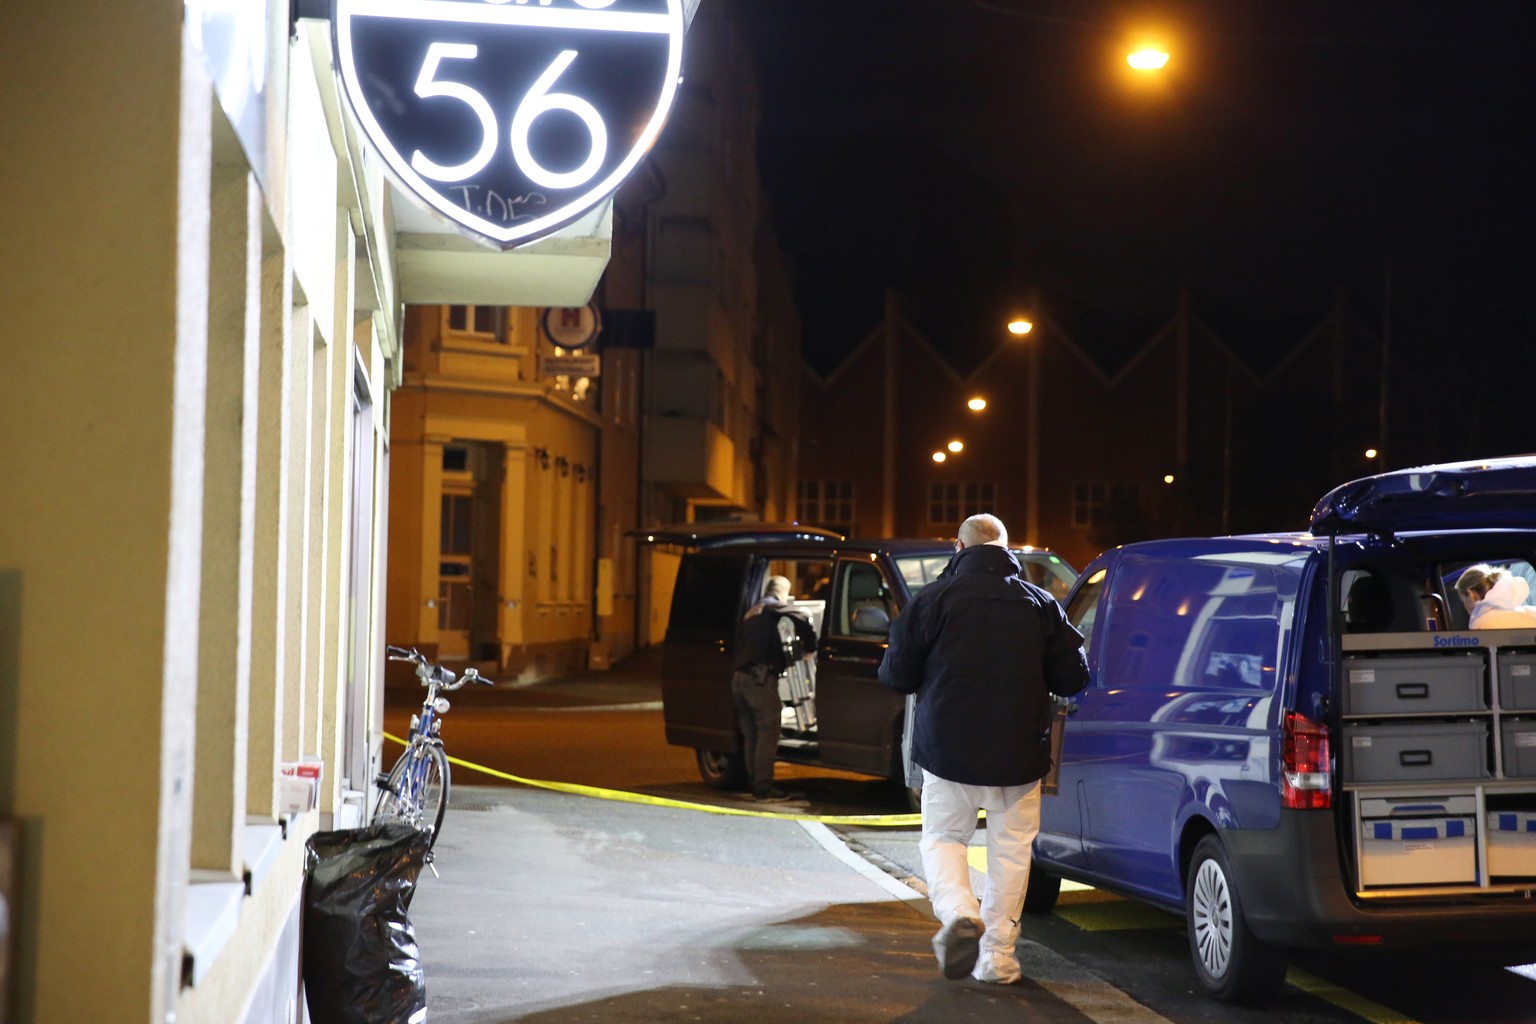 A forensic team investigates the scene after deadly gunfire was unleashed in Cafe 56, Friday, March 10, 2017, in Basel, Switzerland. (AP Photo/Dominique Soguel)